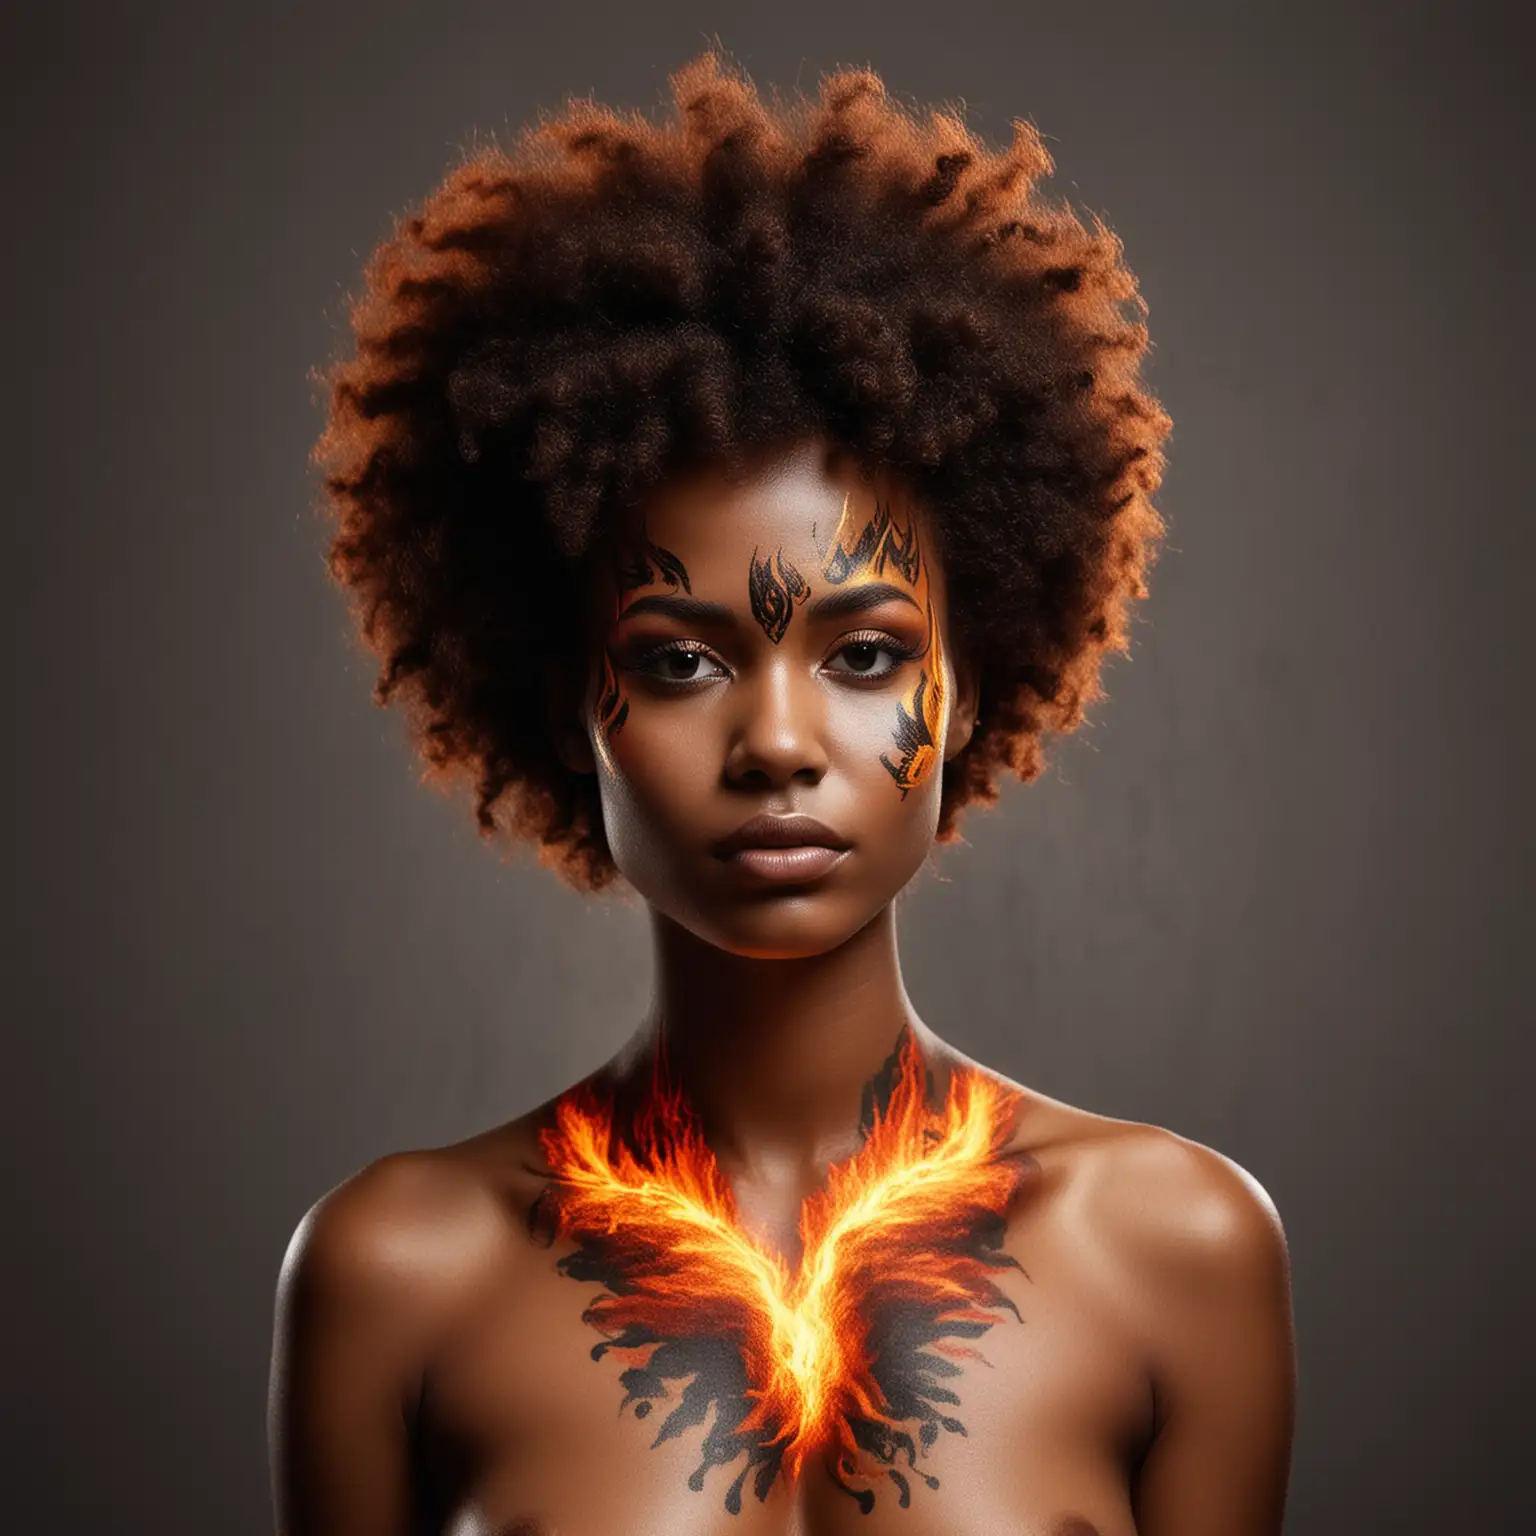 Afrohaired-Girl-with-Flame-Body-Art-Creative-Portrait-of-a-Woman